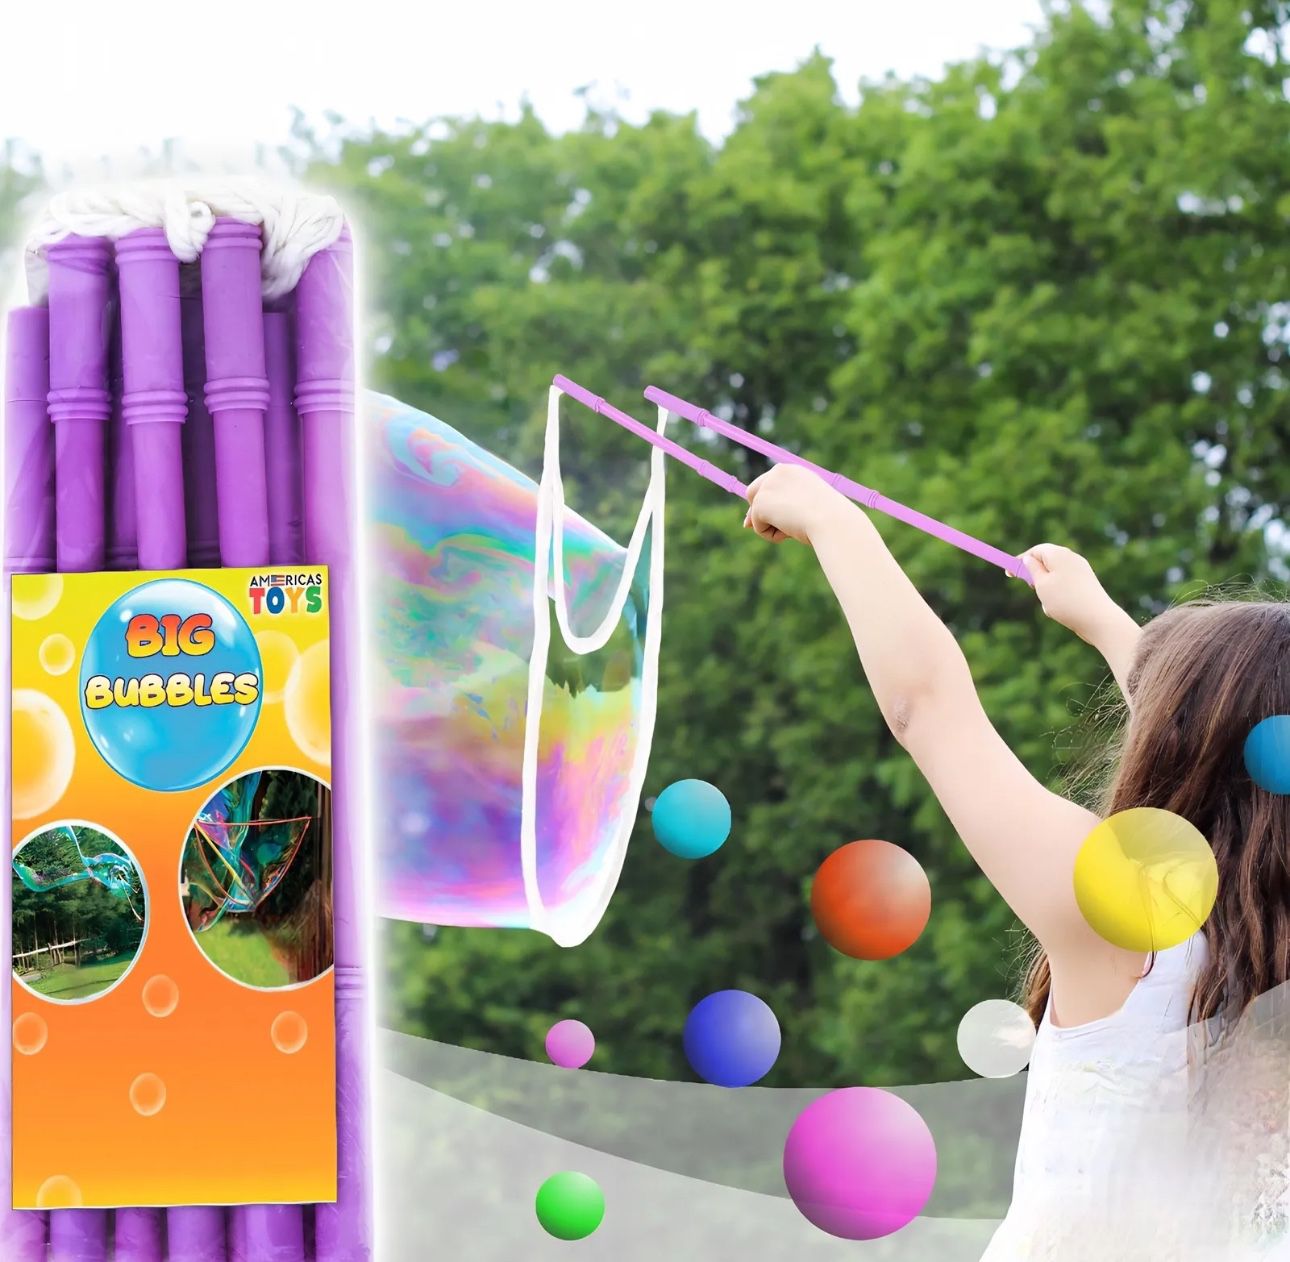 Giant Bubble Wands for Kids Multiple Big Bubbles Toy Gift Set of 2 Purple Wands